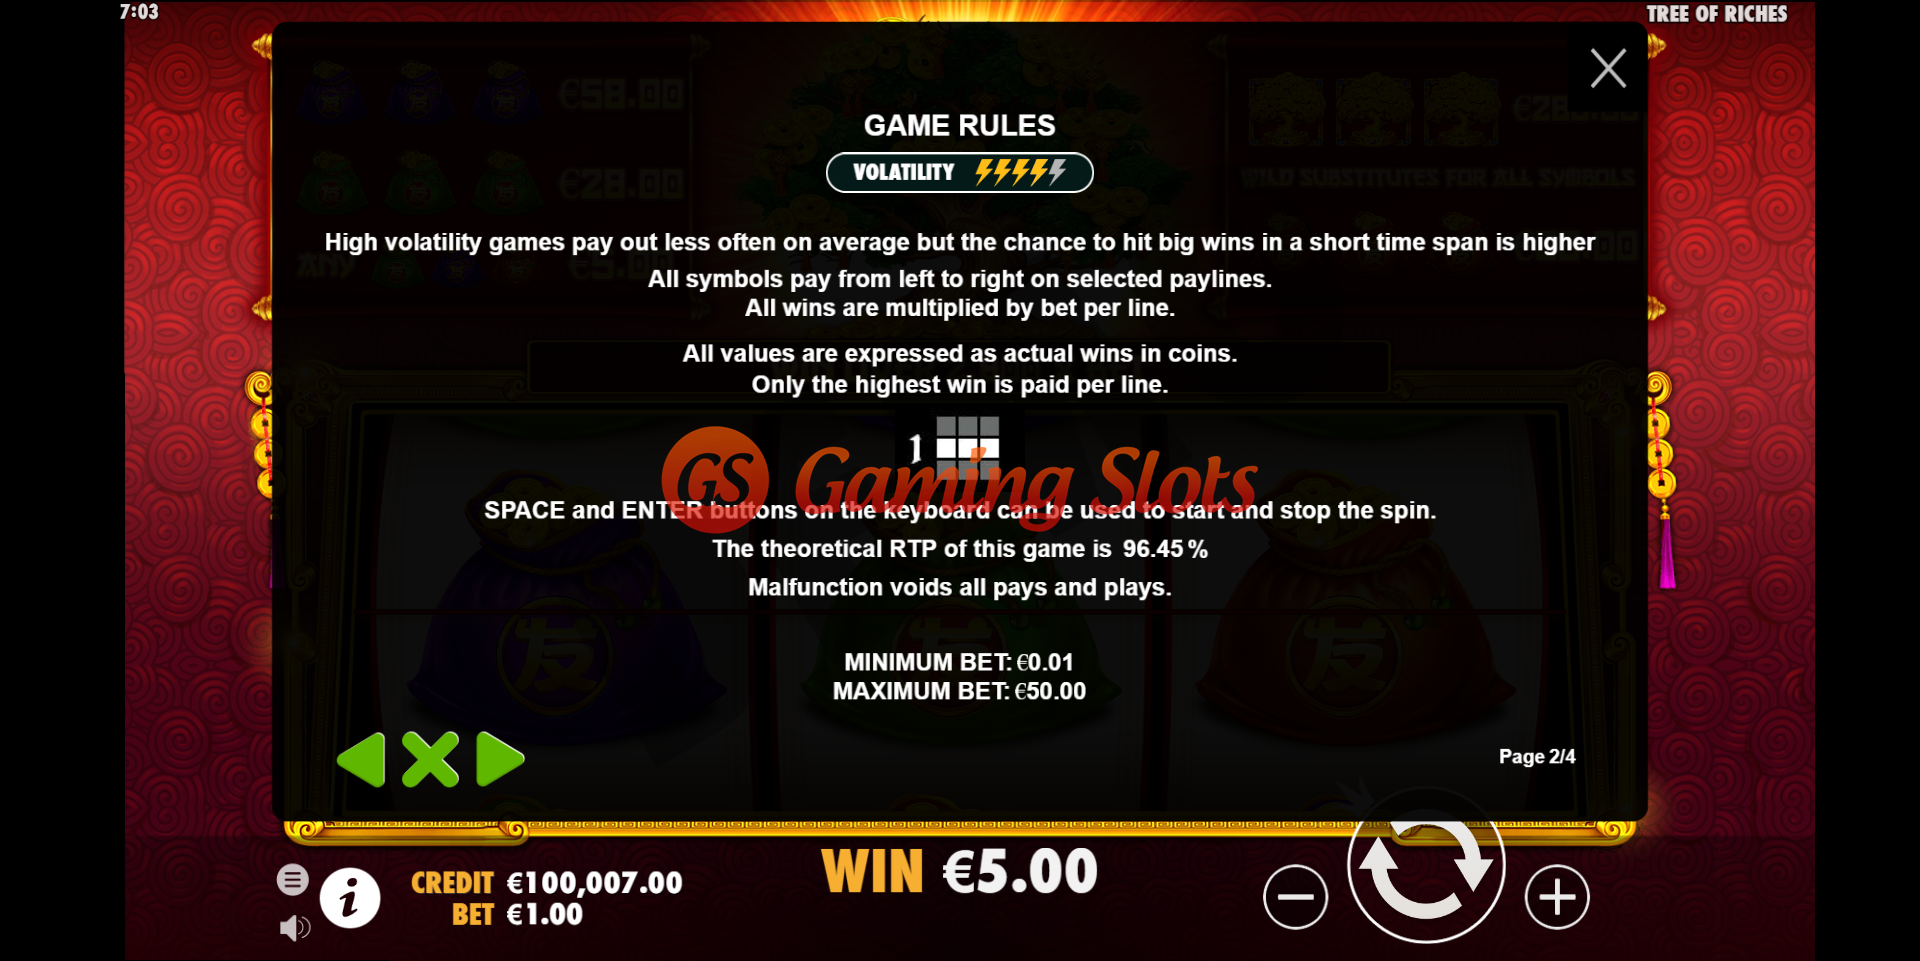 Game Rules for Tree of Riches slot from Pragmatic Play